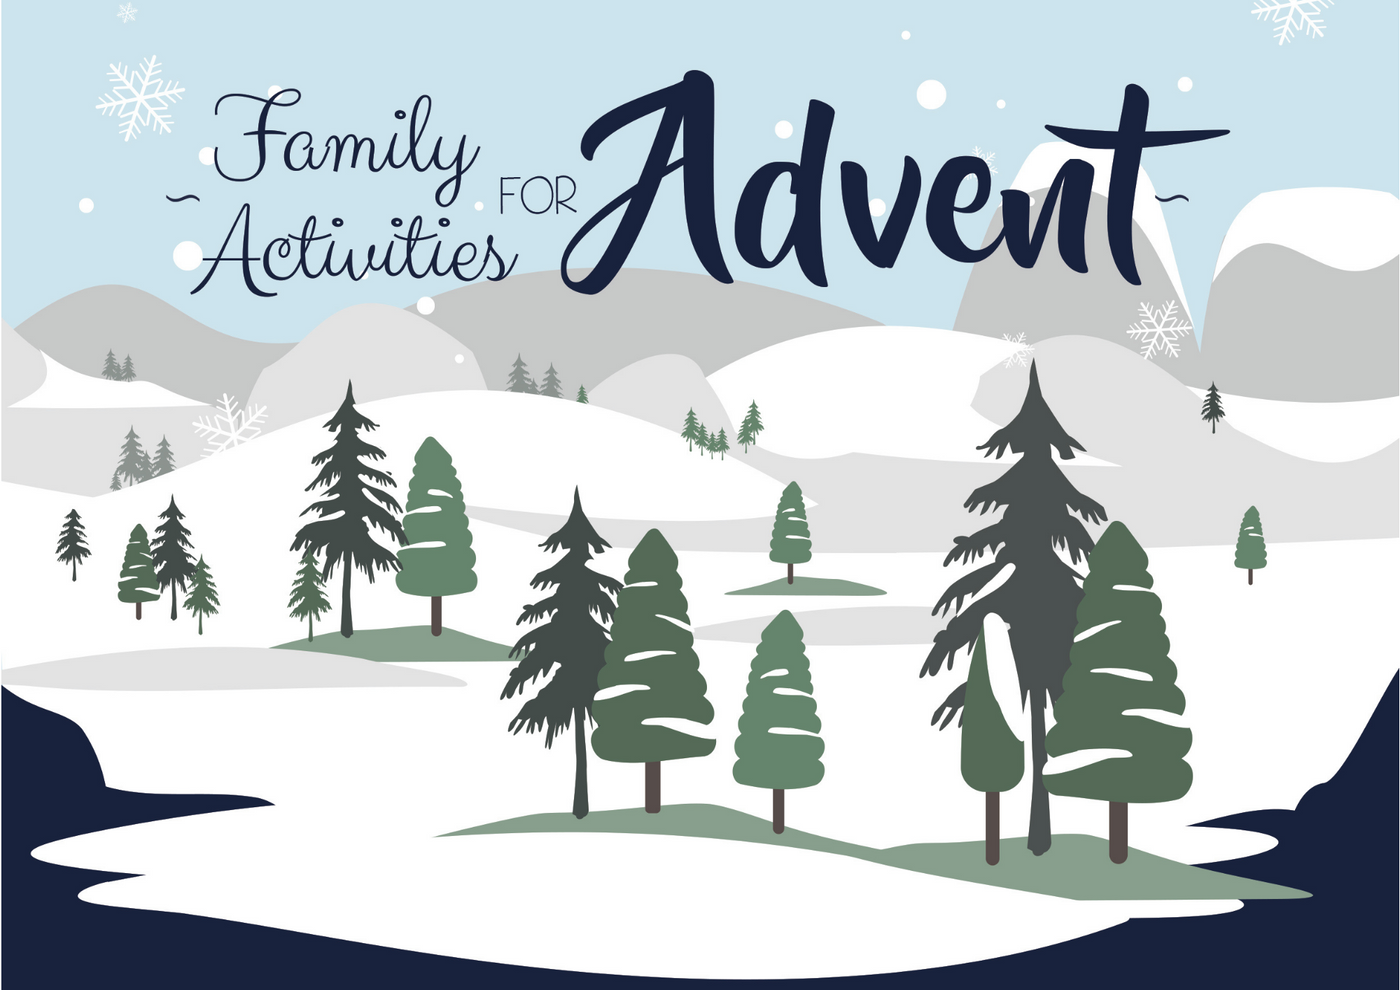 Family_activities_for_advent_header